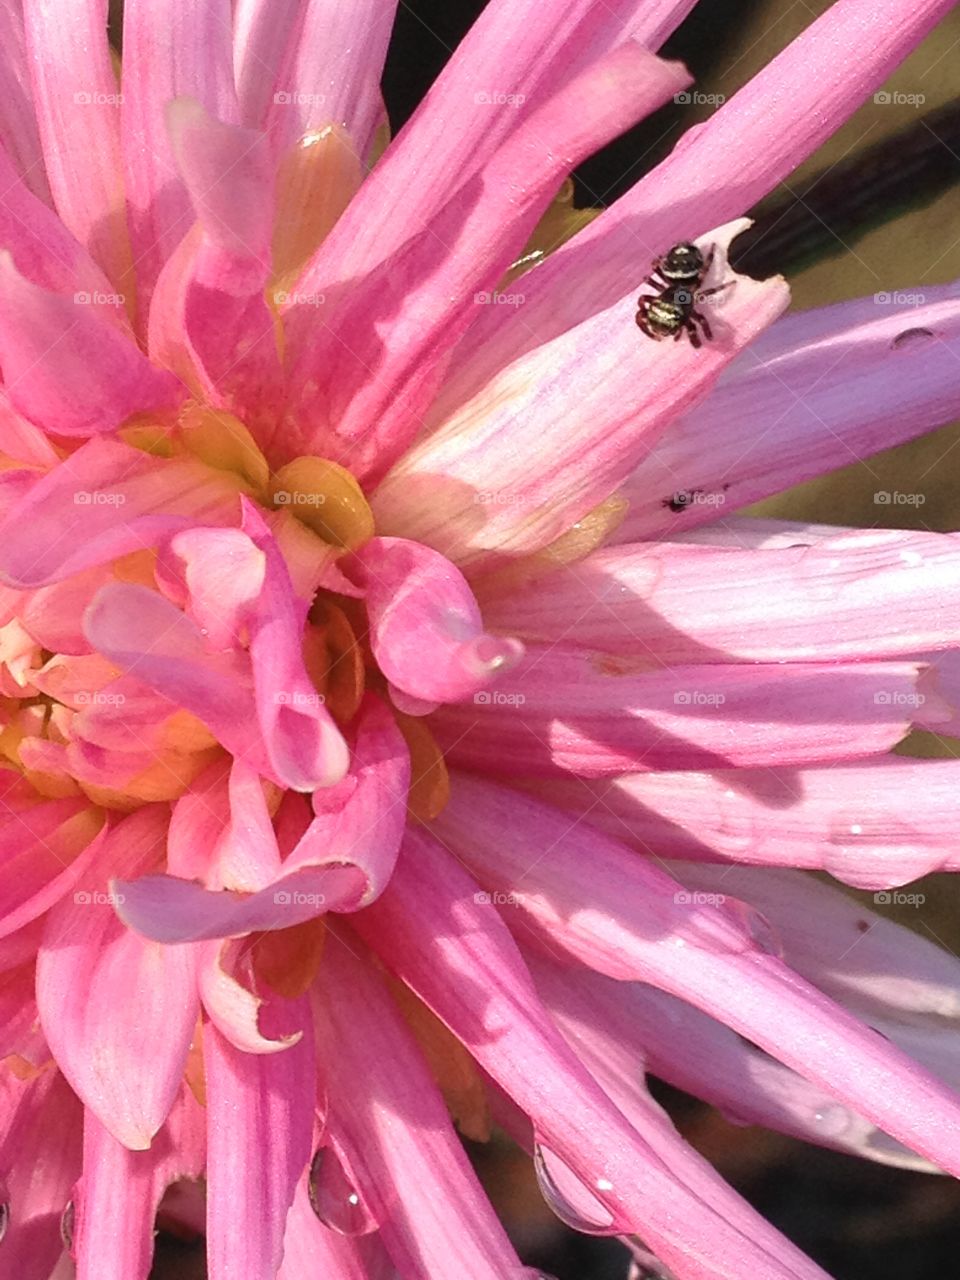 Dahlia, close up pic, with spider🕷on petal!